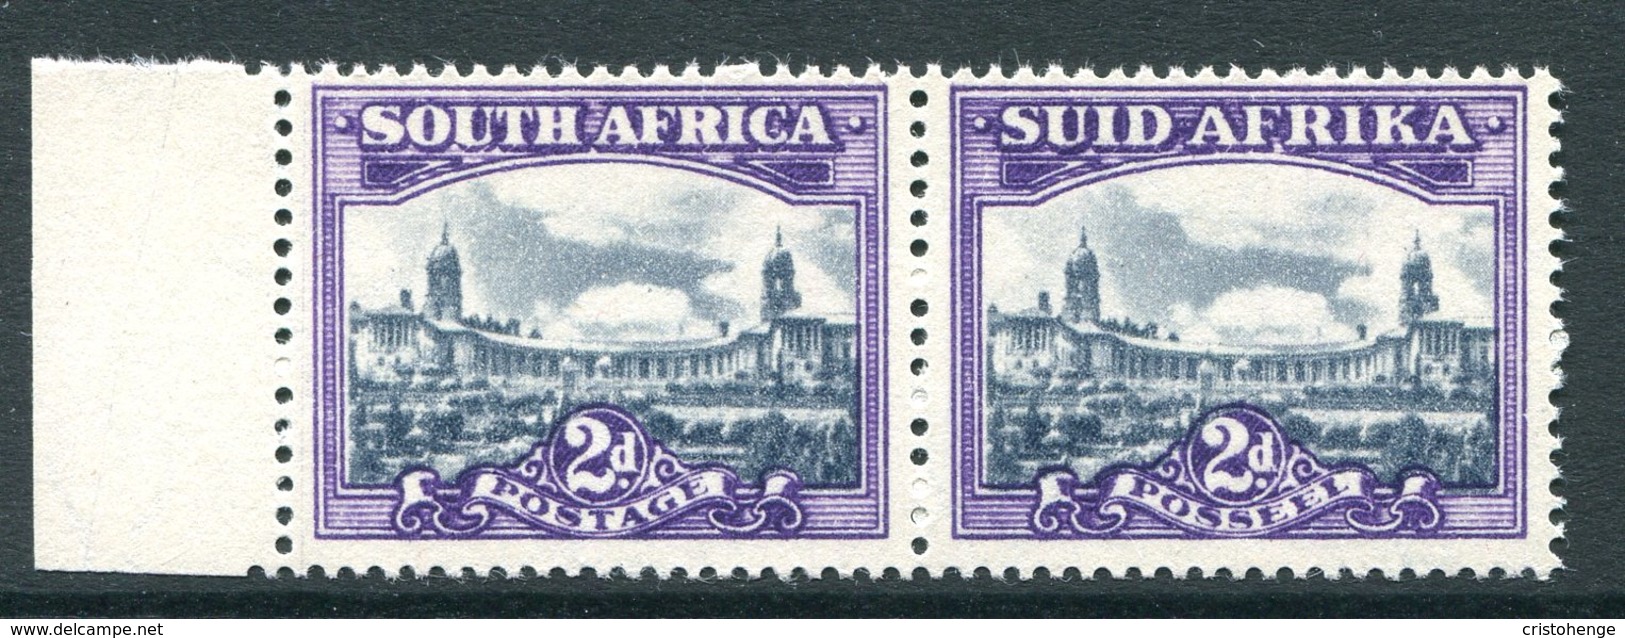 South Africa 1945-47 Redrawn - 2d Union Buildings - Deep Reddish-violet Pair MNH (SG 107) - Unused Stamps